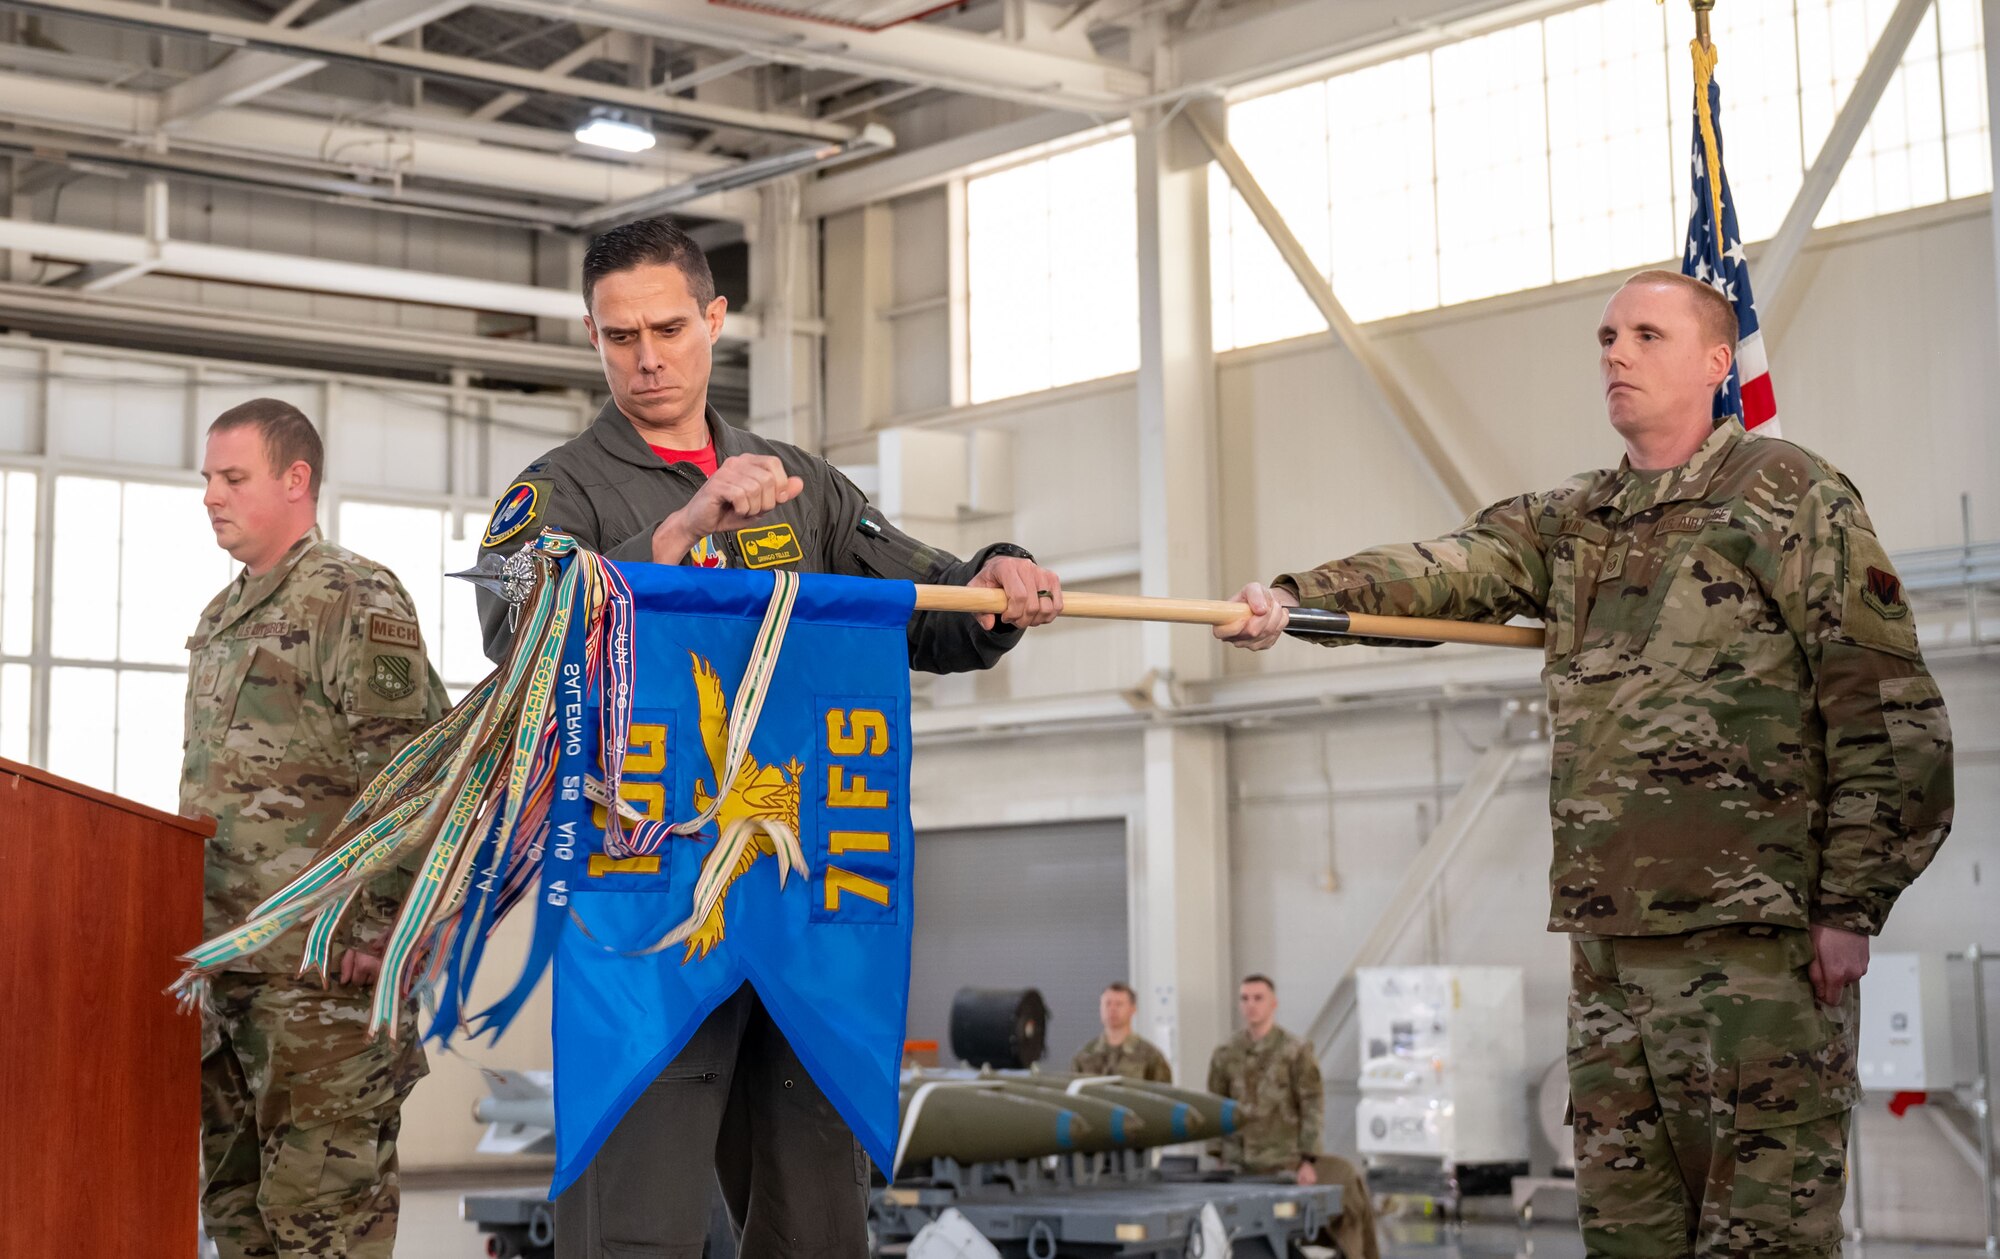 U.S. Air Force Col. Brandon Tellez, 1st Operations Group commander, inspects the 71st Fighter Squadron guide-on during the unit’s reactivation at Joint Base Langley-Eustis, Virginia, Jan 6, 2023.